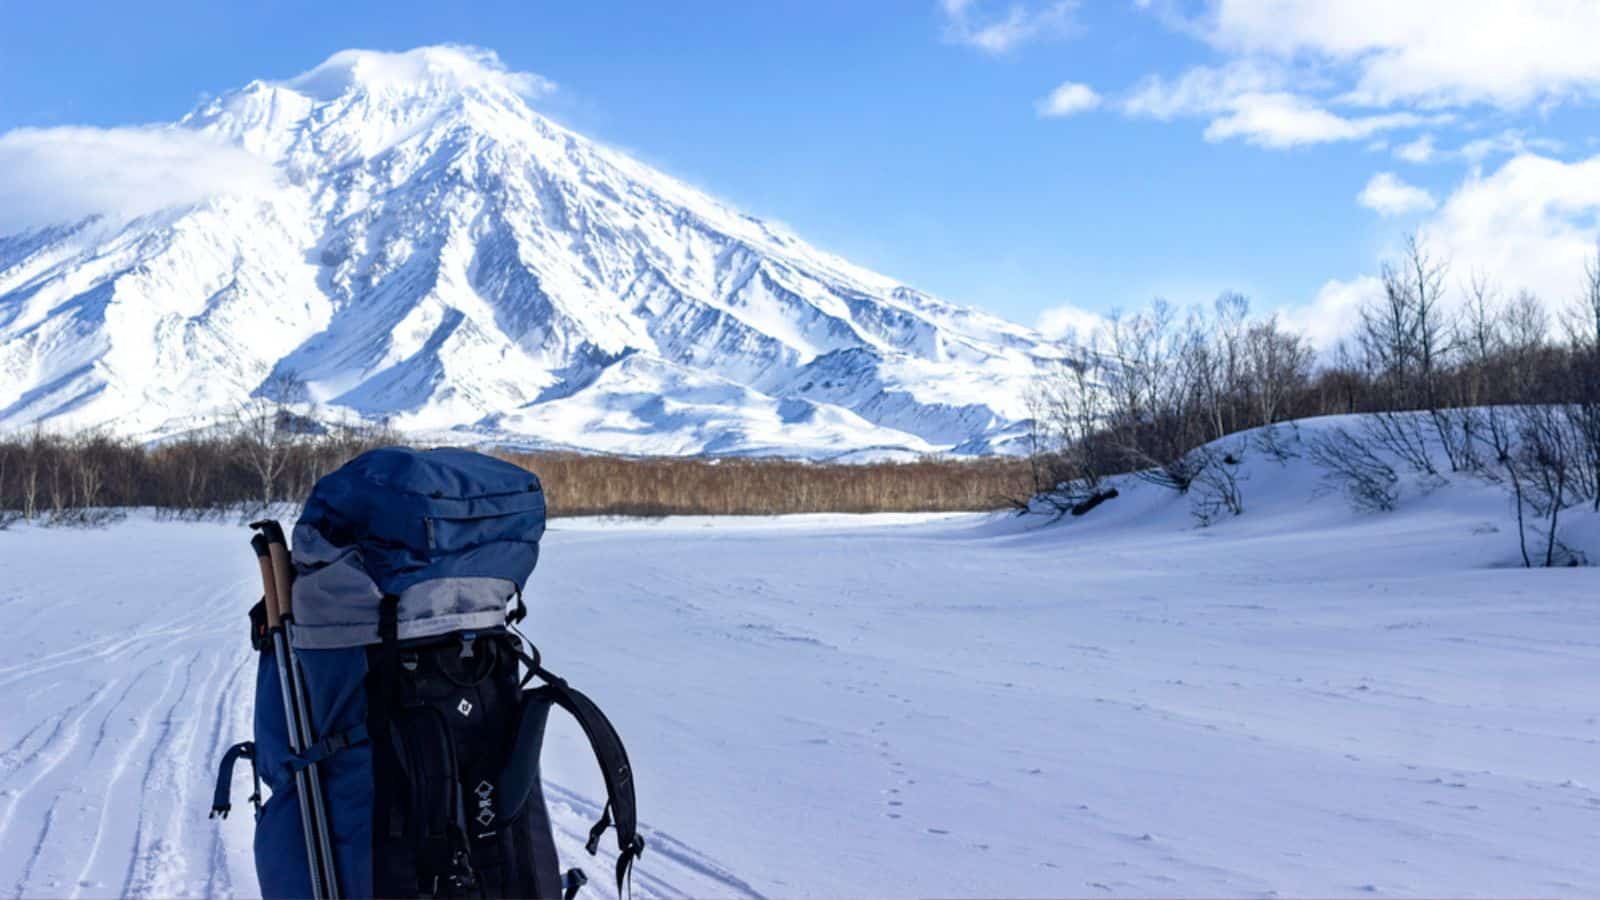 A blue tourist backpack stands on the snow